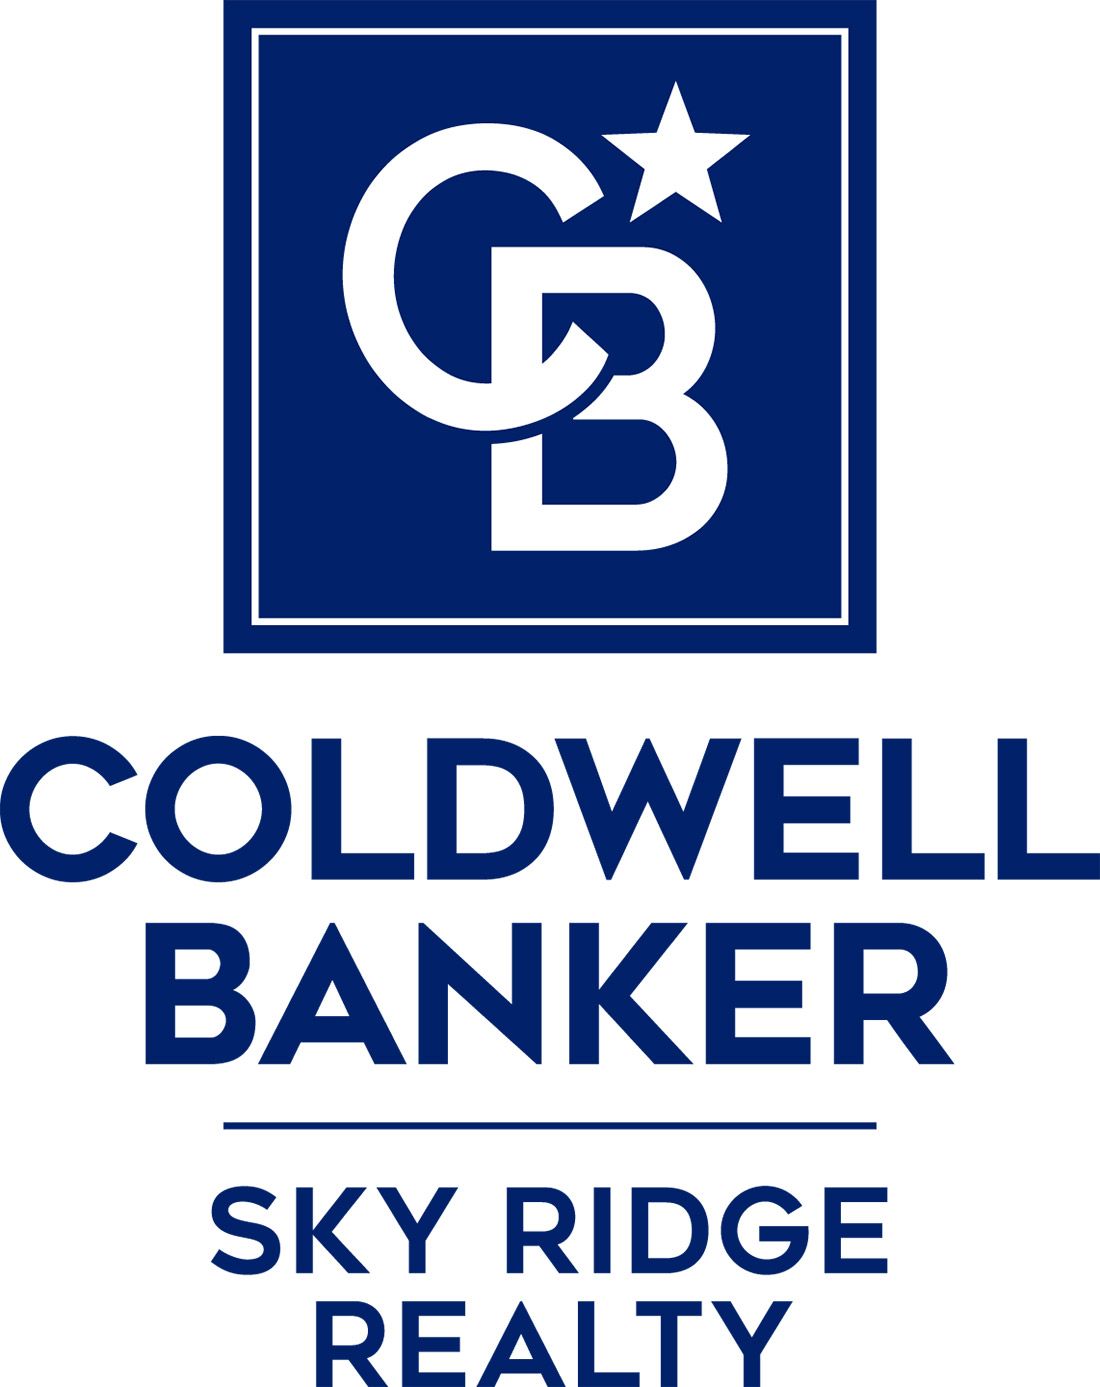 Coldwell Banker - Sky Ridge Realty